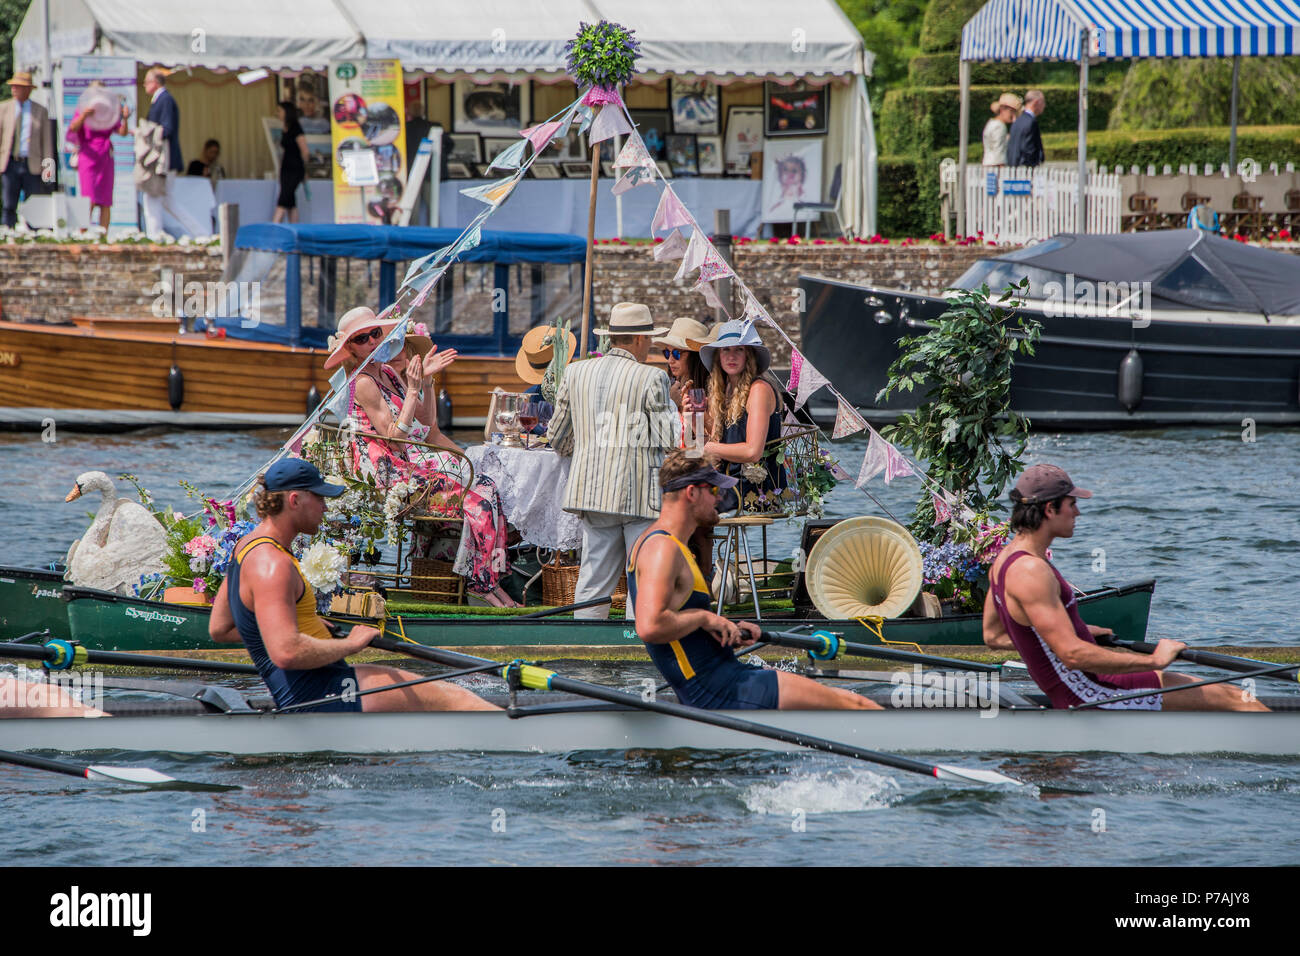 Henley on Thames, UK. 5th July, 2018. Another scorching day brings out the blazers and summer dresses in the Stewards Enclosure - Henley Royal regatta, Henley on Thames, UK 05 Jul 2018. Credit: Guy Bell/Alamy Live News Stock Photo